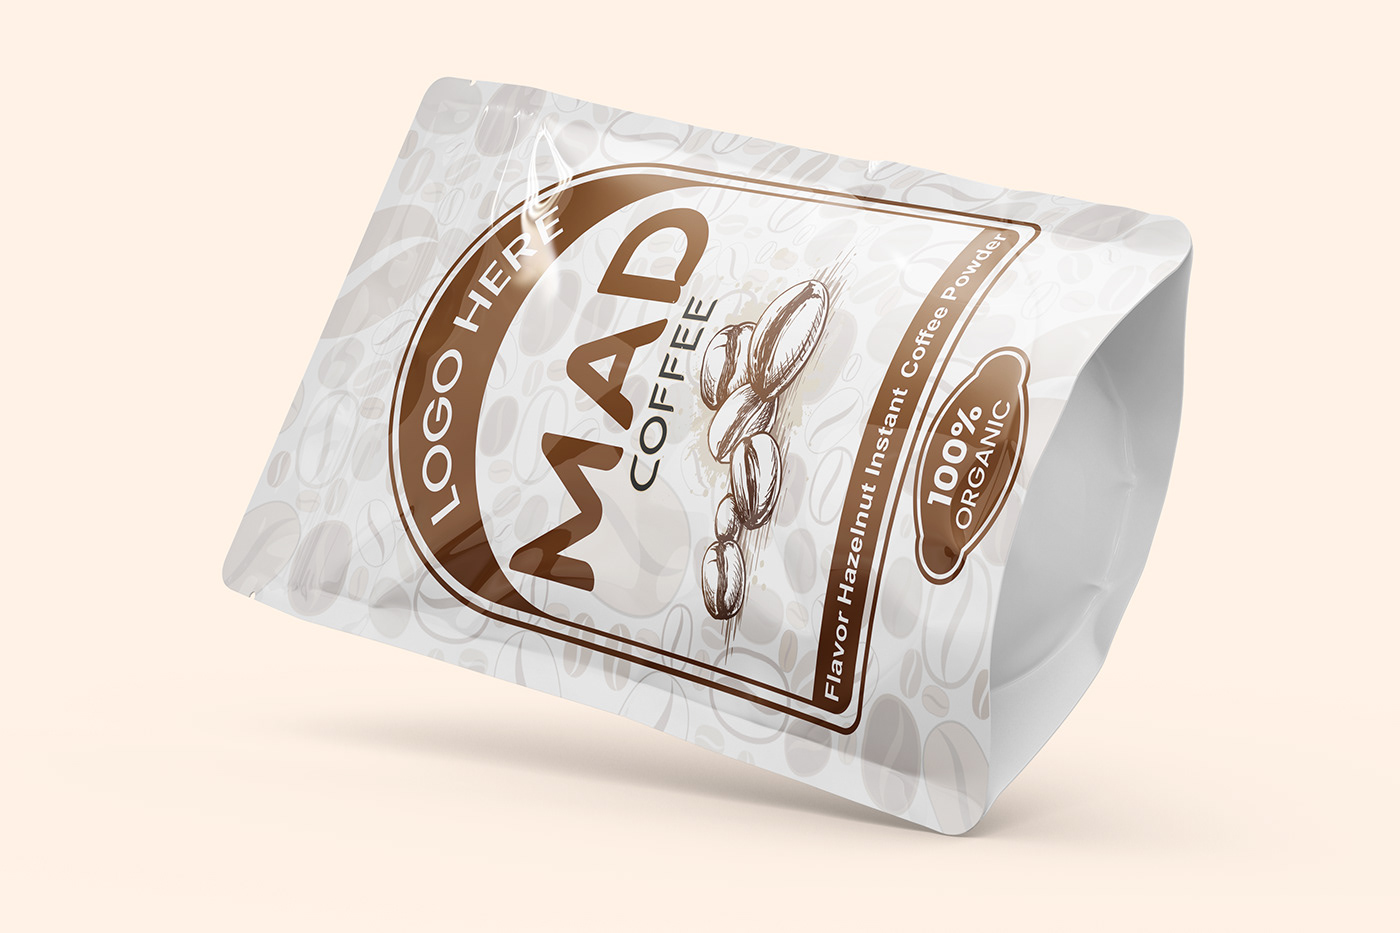 pouch Packaging brand identity coffee pouch label design product packaging Pouch Design  package Pouch Bag Pouch Packaging Design